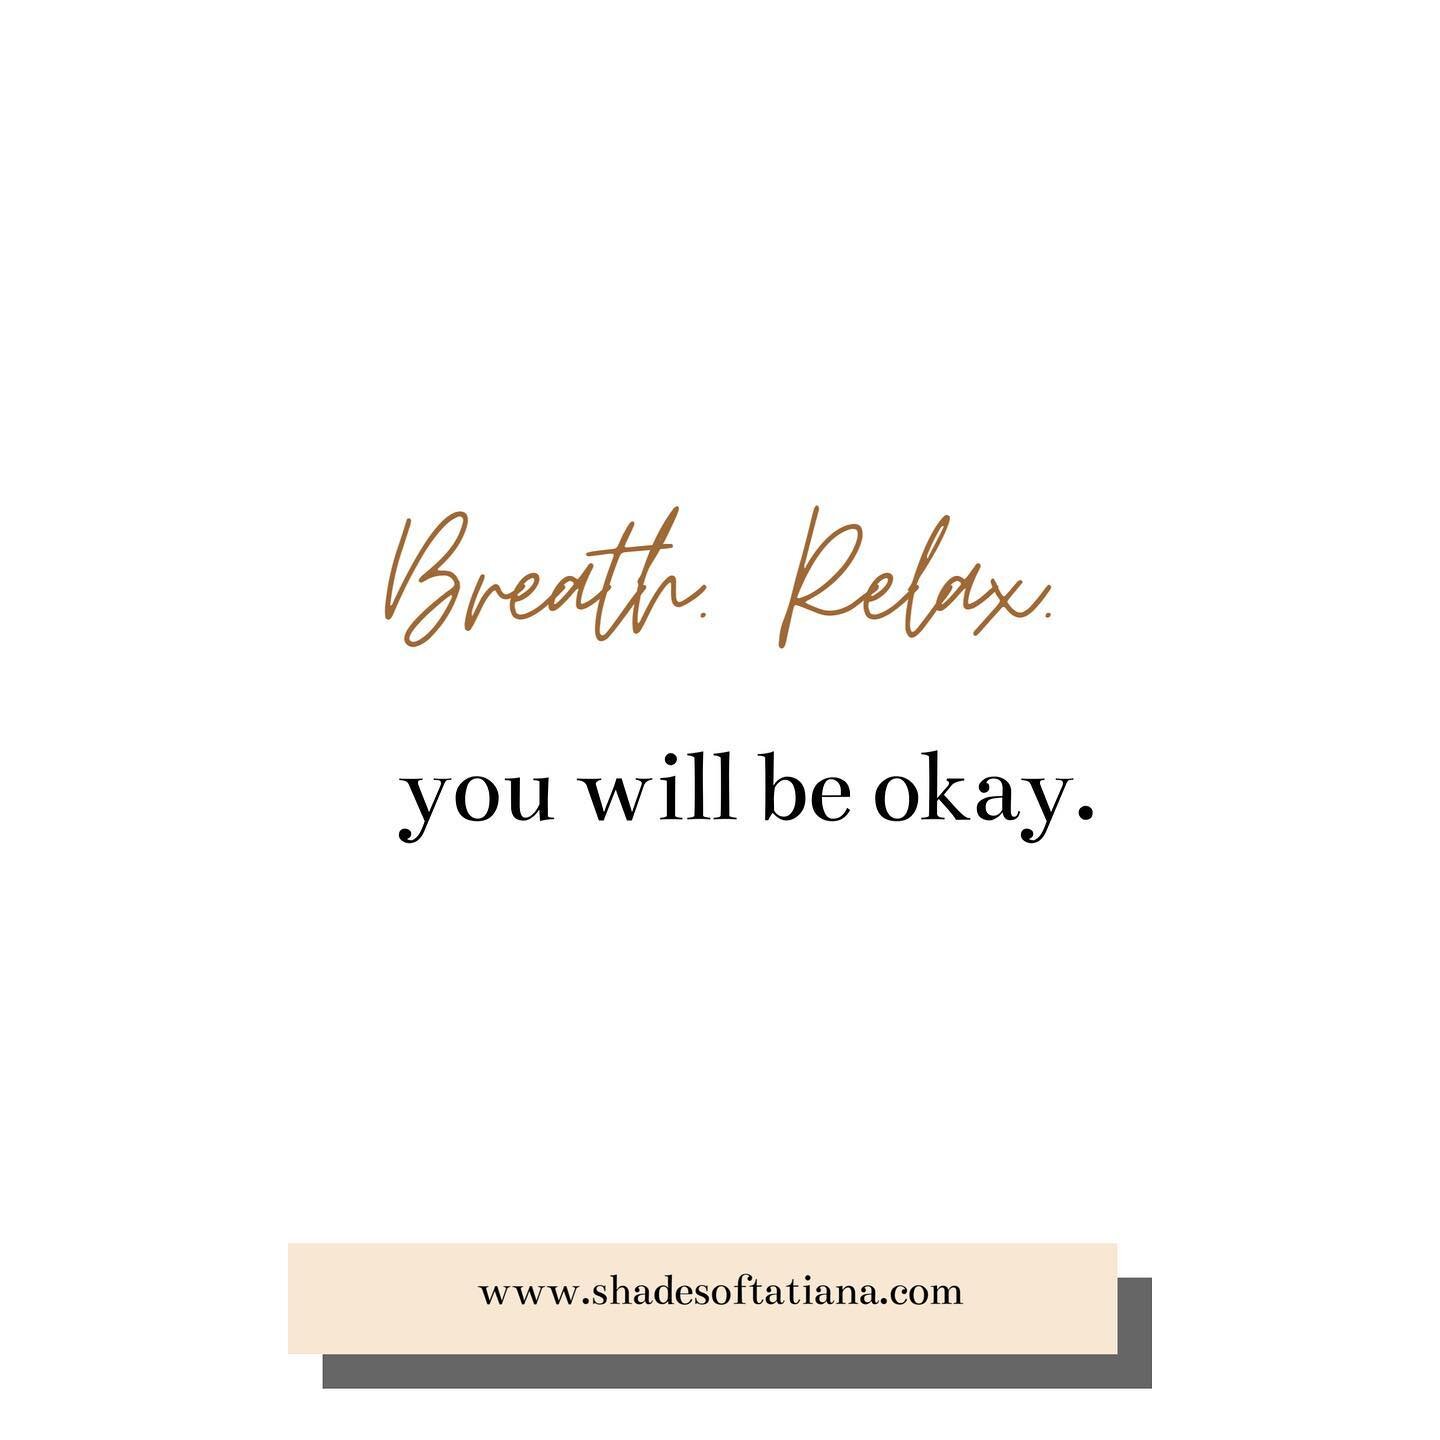 Inhale. Exhale. 

Work hard but don&rsquo;t let work take over your life. It&rsquo;s easy to get consumed by work, the weight of the words, and negative thoughts.

Just breath and give yourself permission to step back from everything that is making y